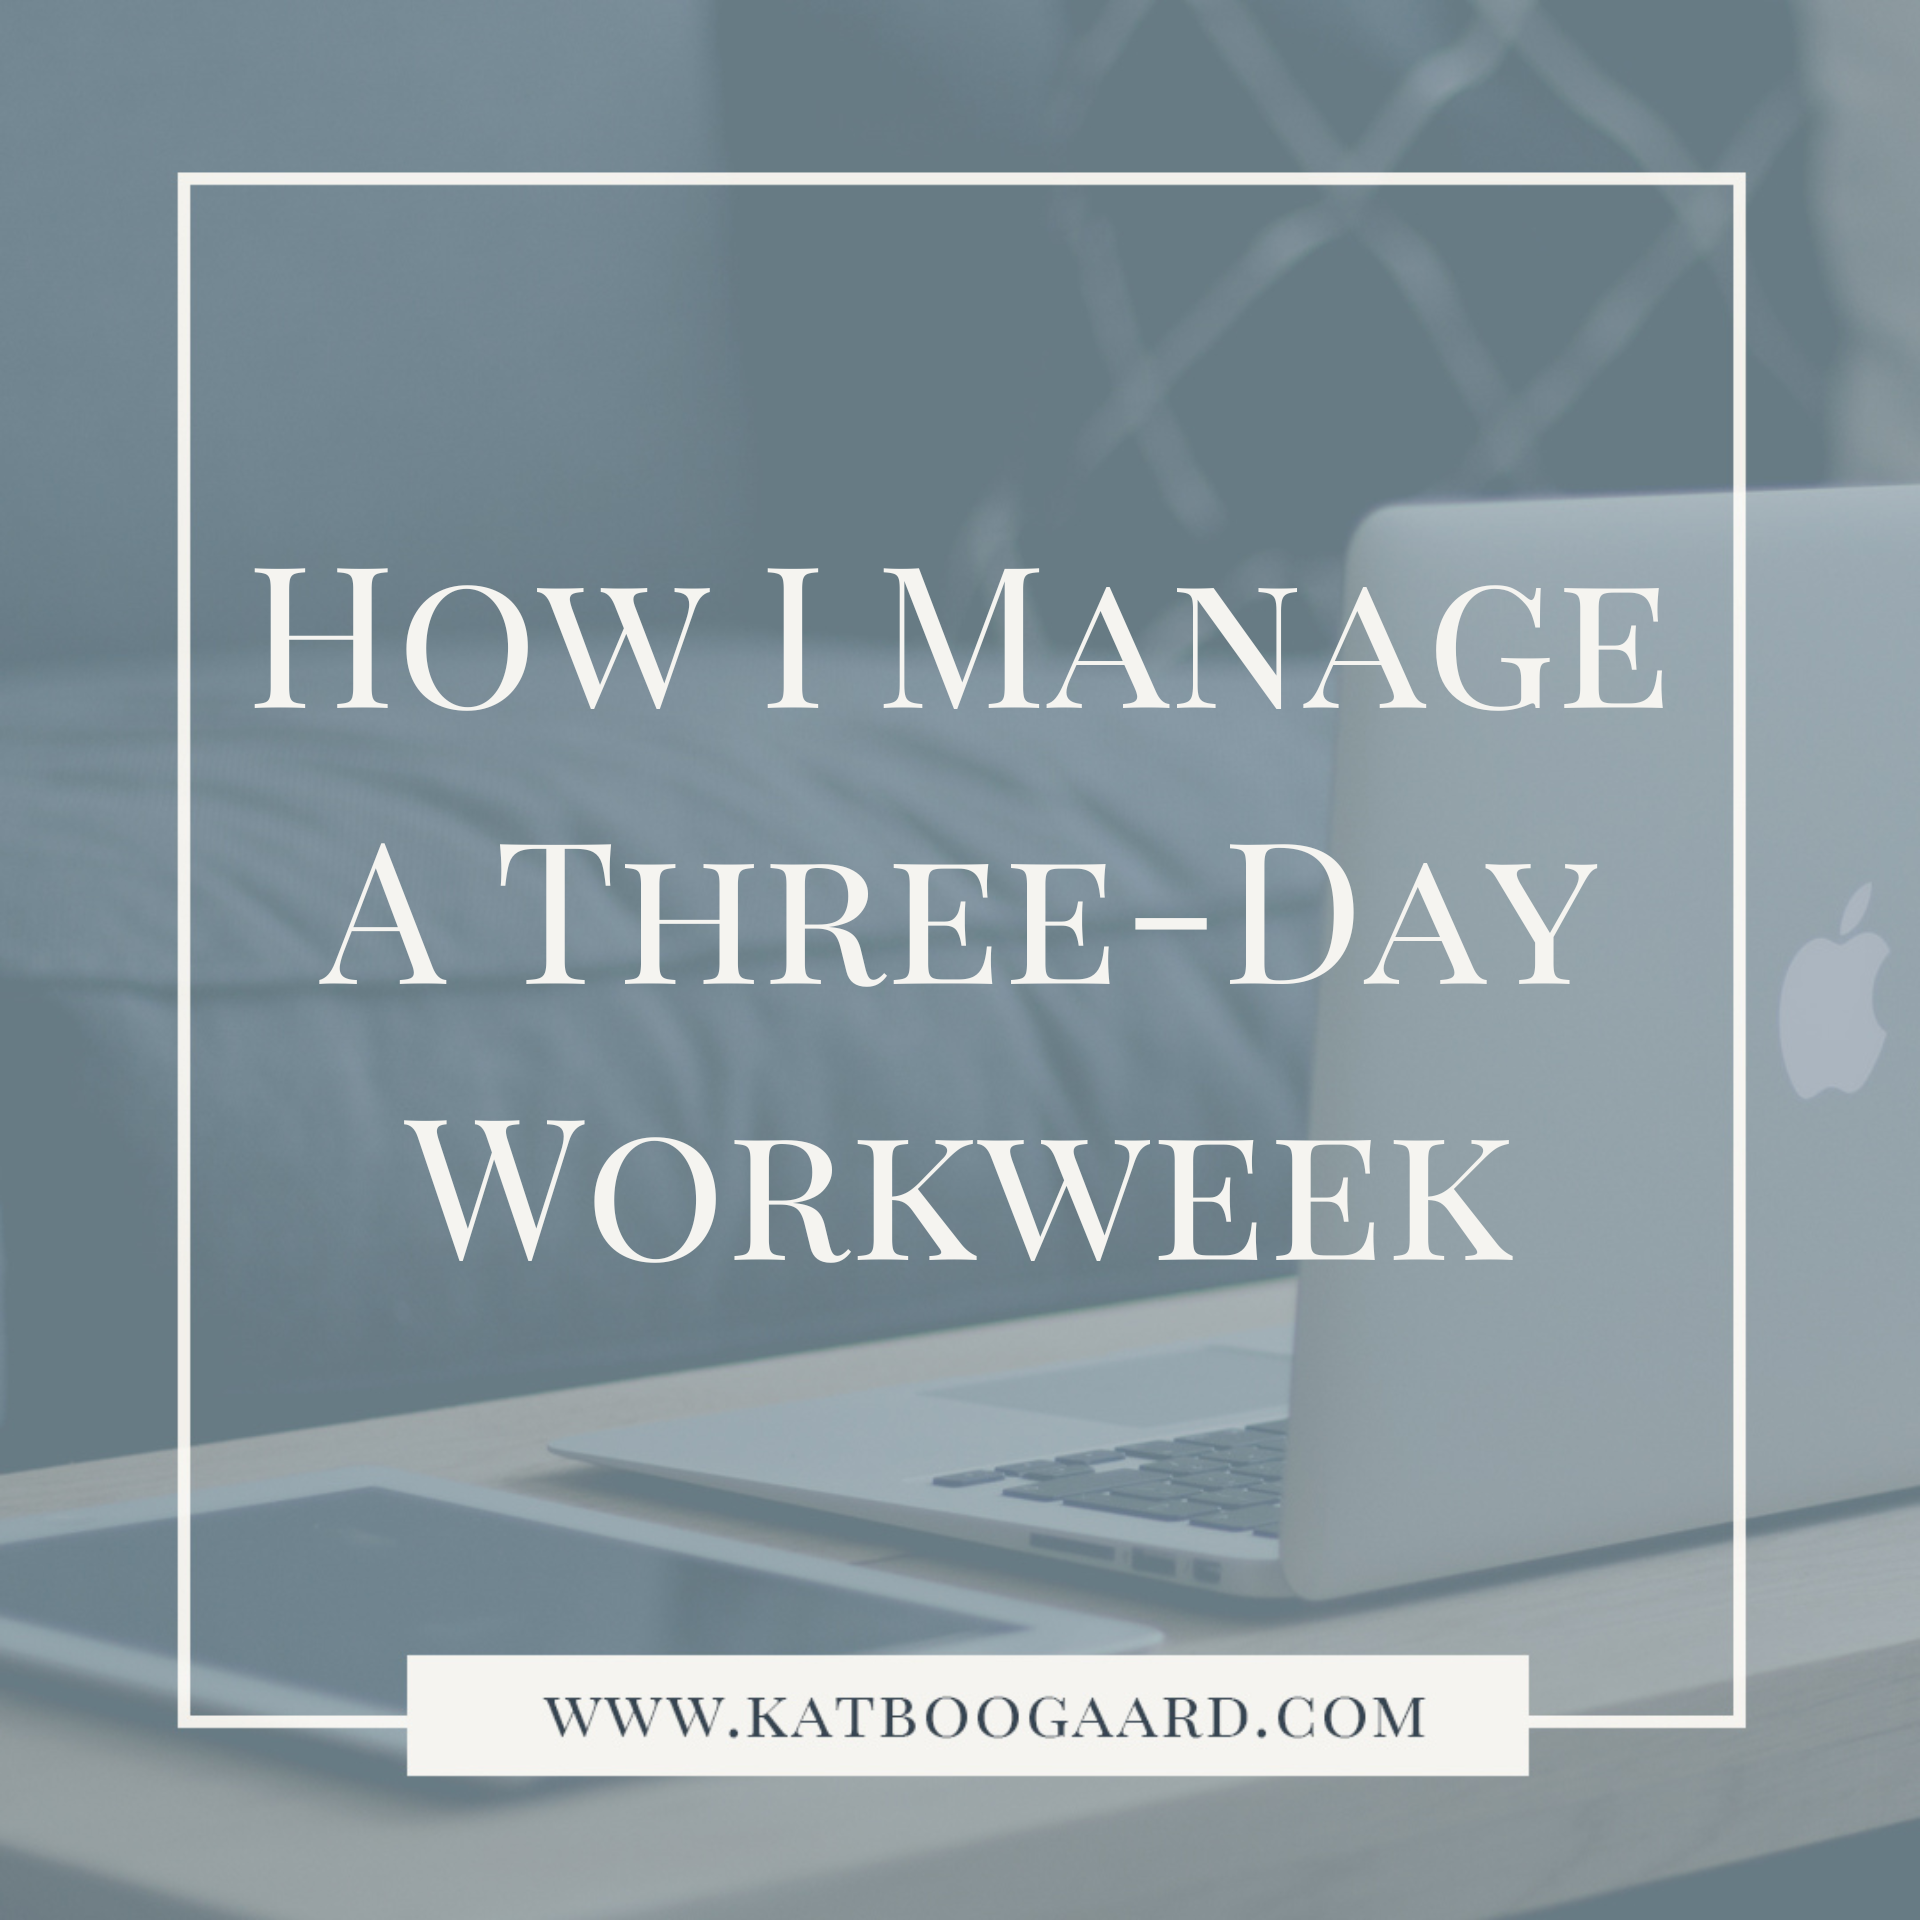 A title image with a laptop in the background with the text "how I manage a three-day workweek" over the top